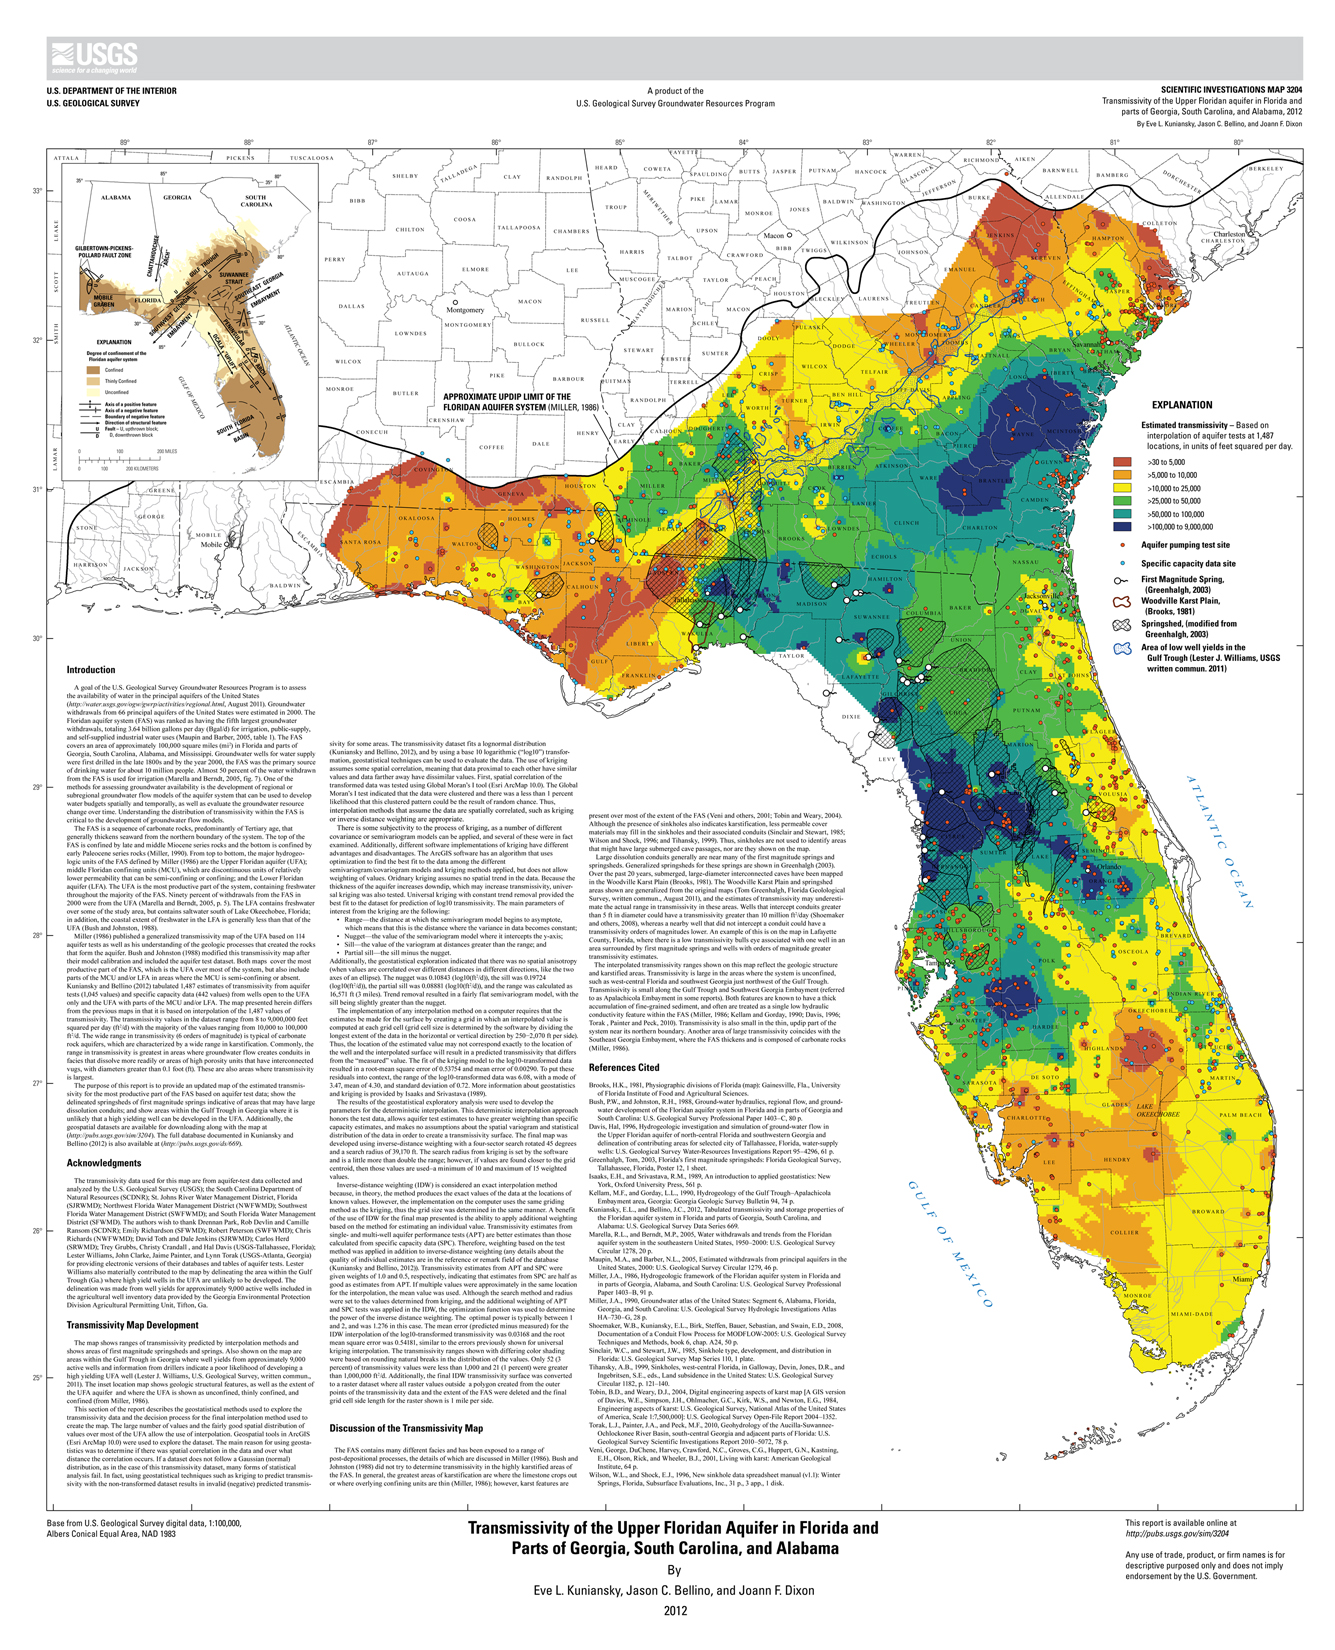 Transmissivity of the Upper Floridan Aquifer in Florida and Parts of